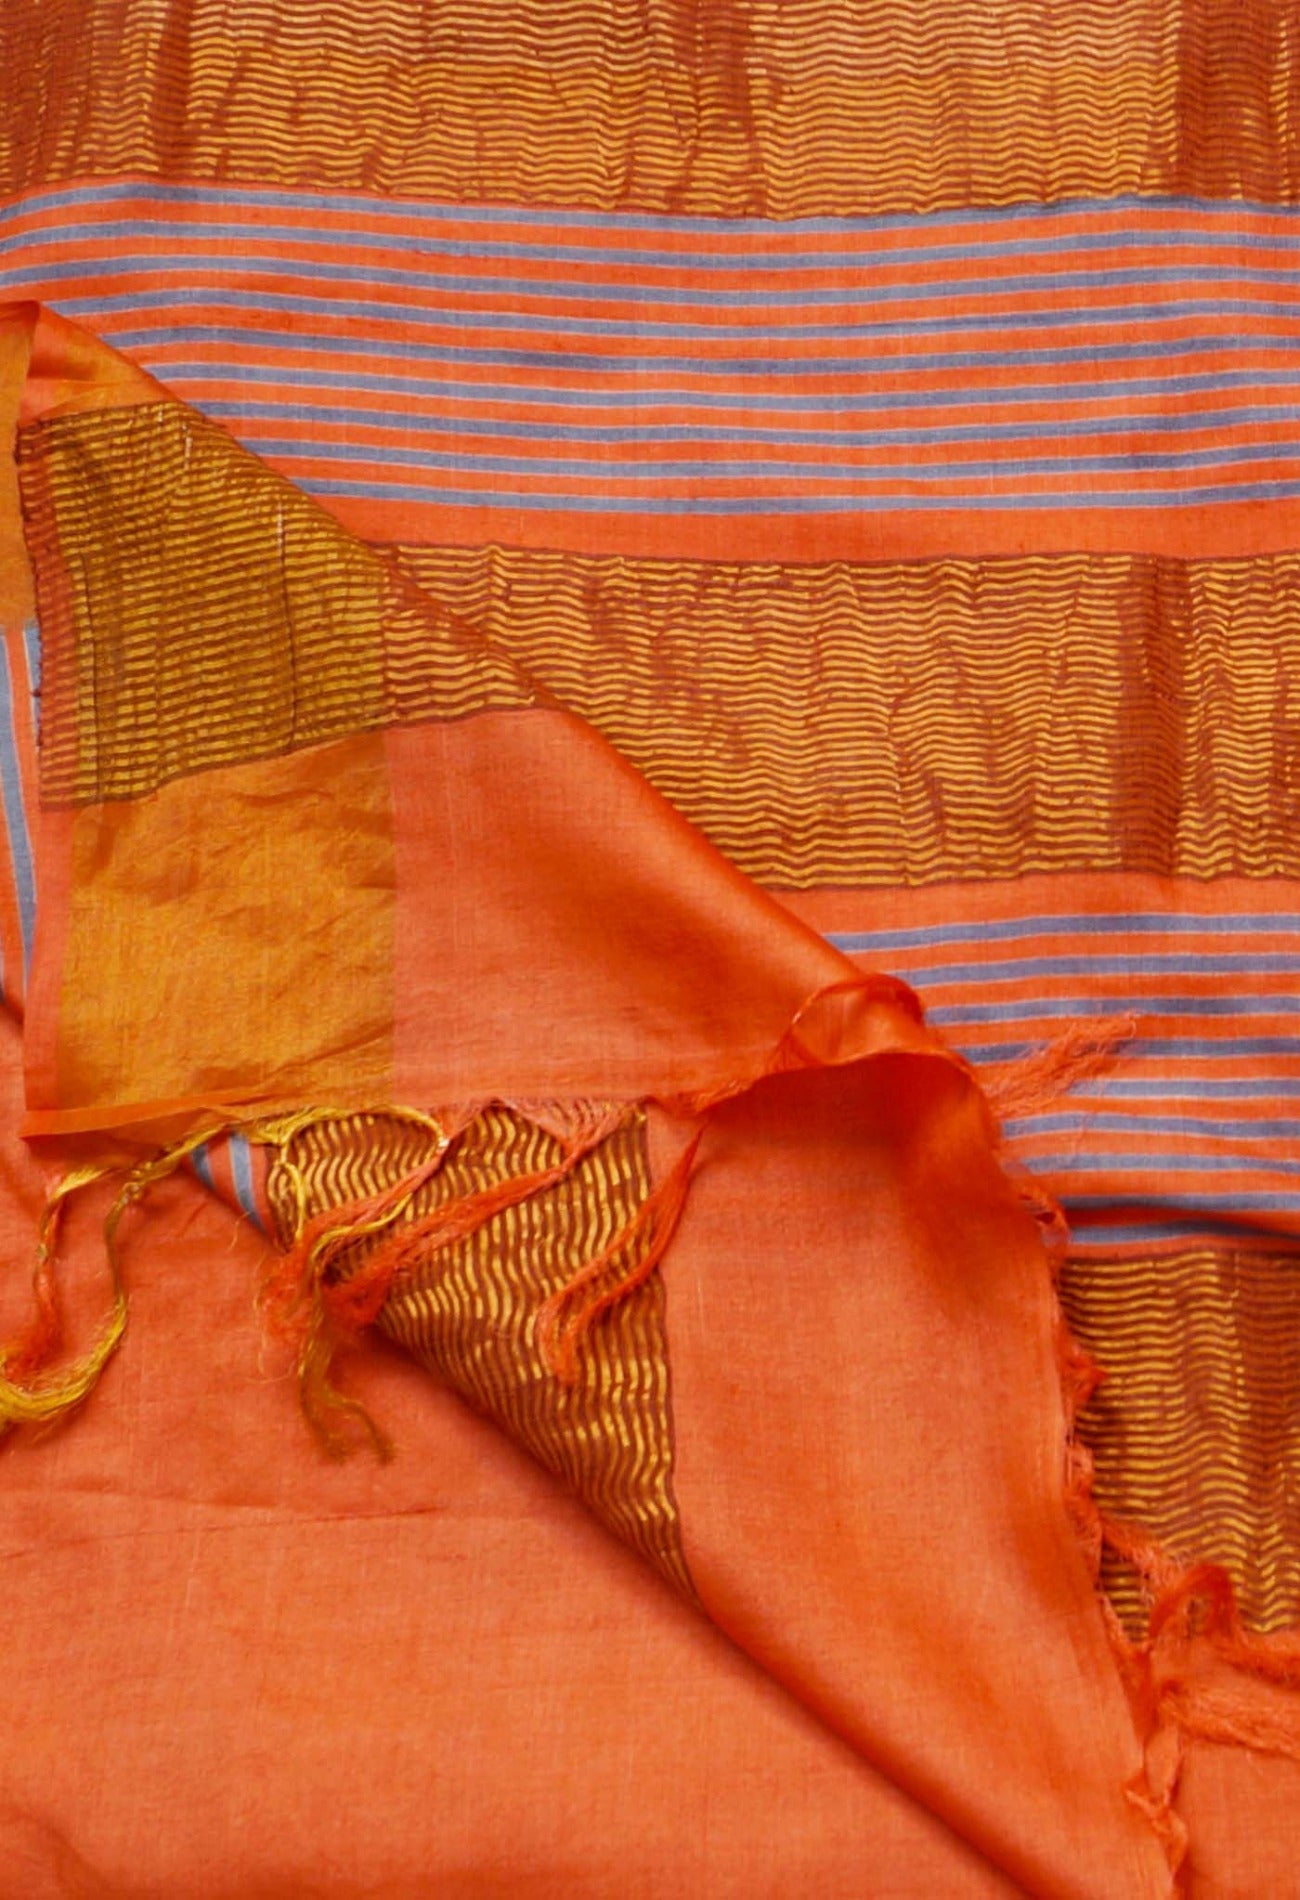 Online Shopping for Red Pure Handloom Bengal Tussar Silk Saree with Hand Block Prints from West Bengal at Unnatisilks.comIndia
